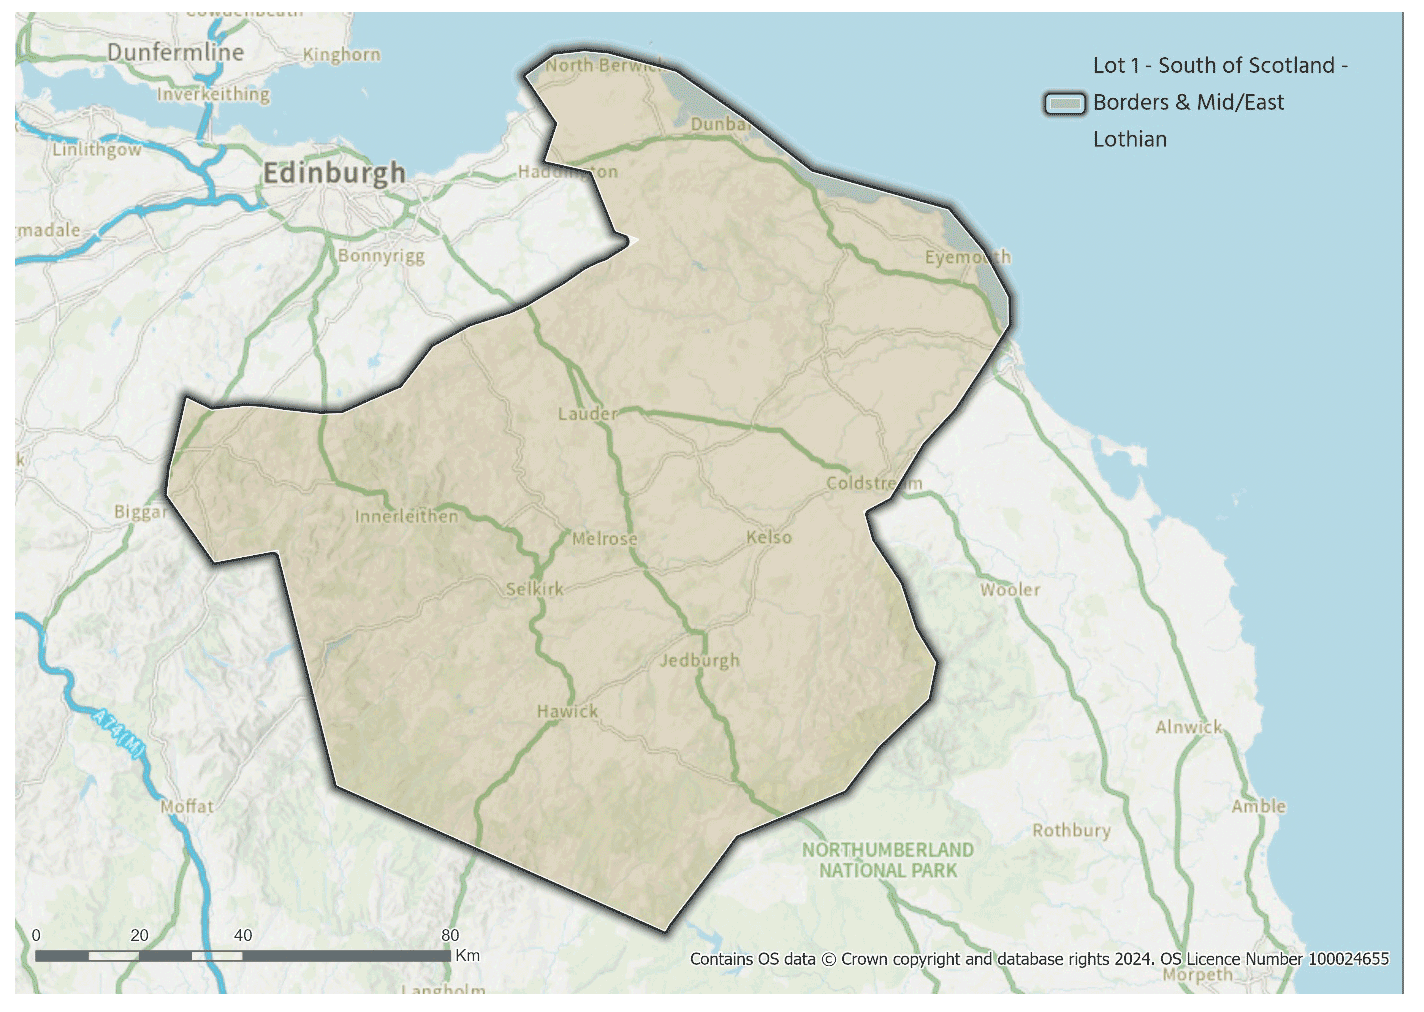 A map showing the Lot 1 procurement area covering Scottish Borders and parts of East Lothian, Midlothian and South Lanarkshire.